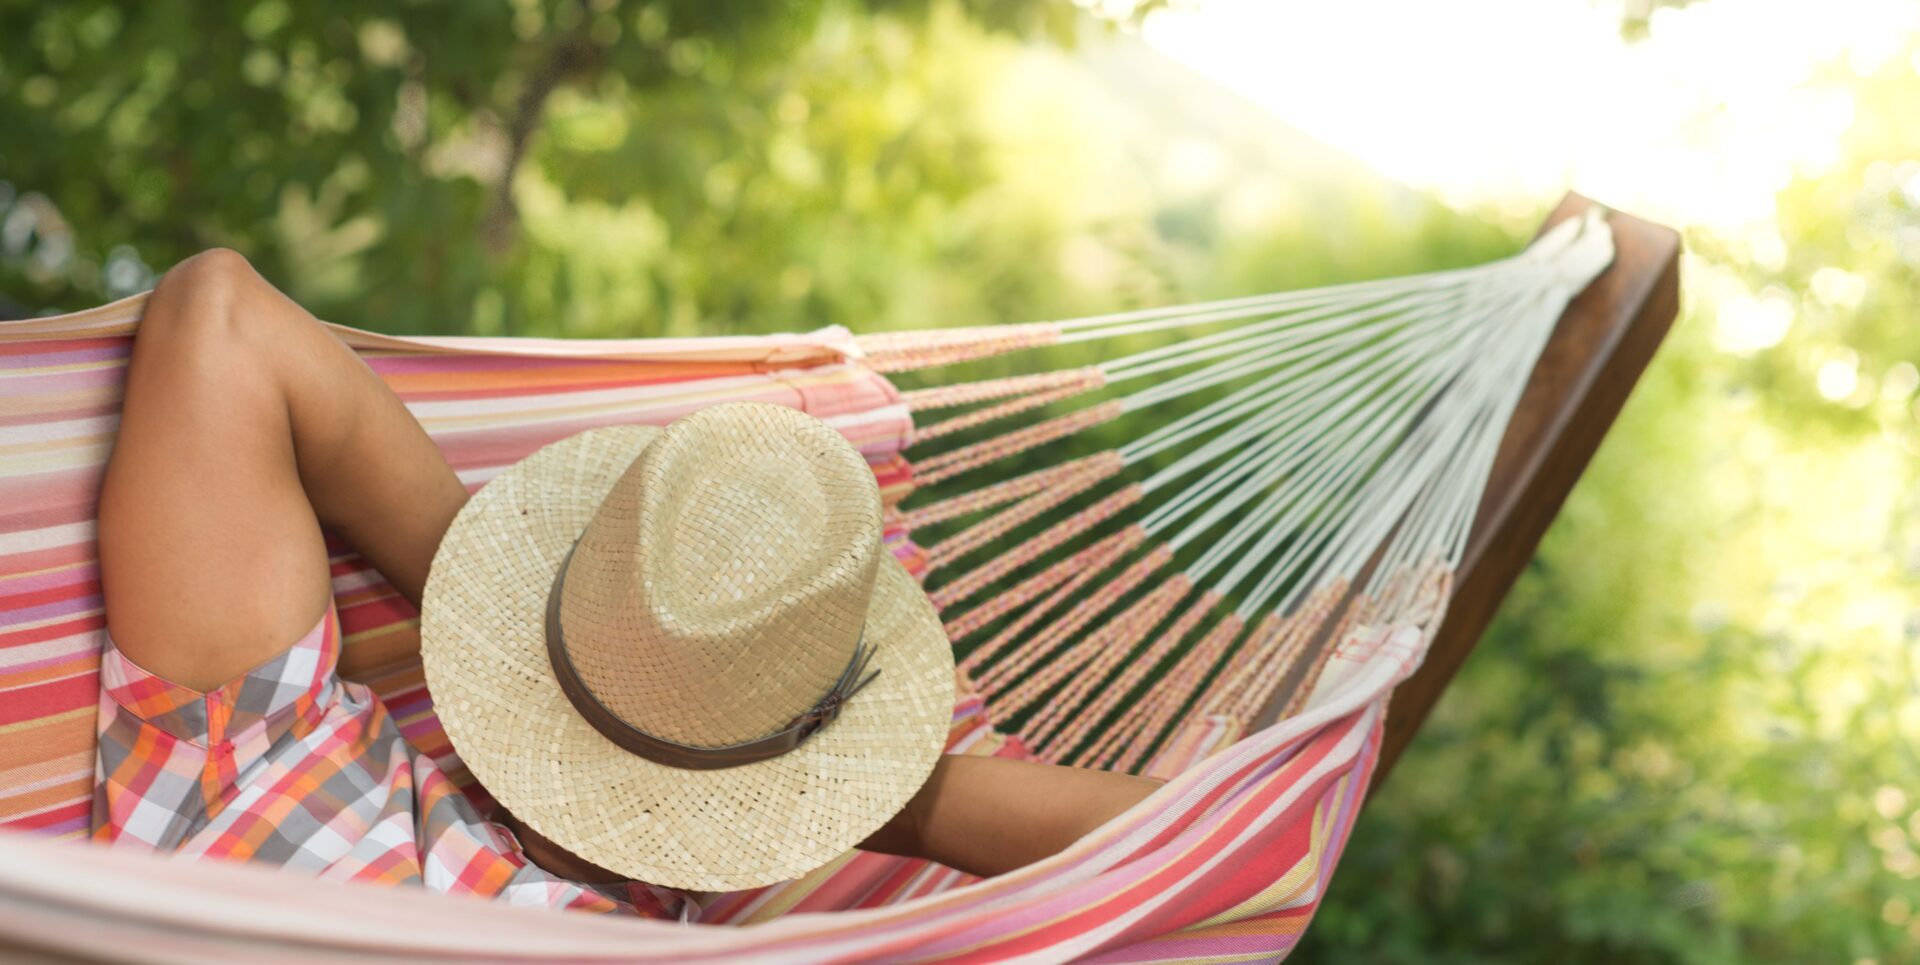 A person in a hammock with a hat and palm tree.